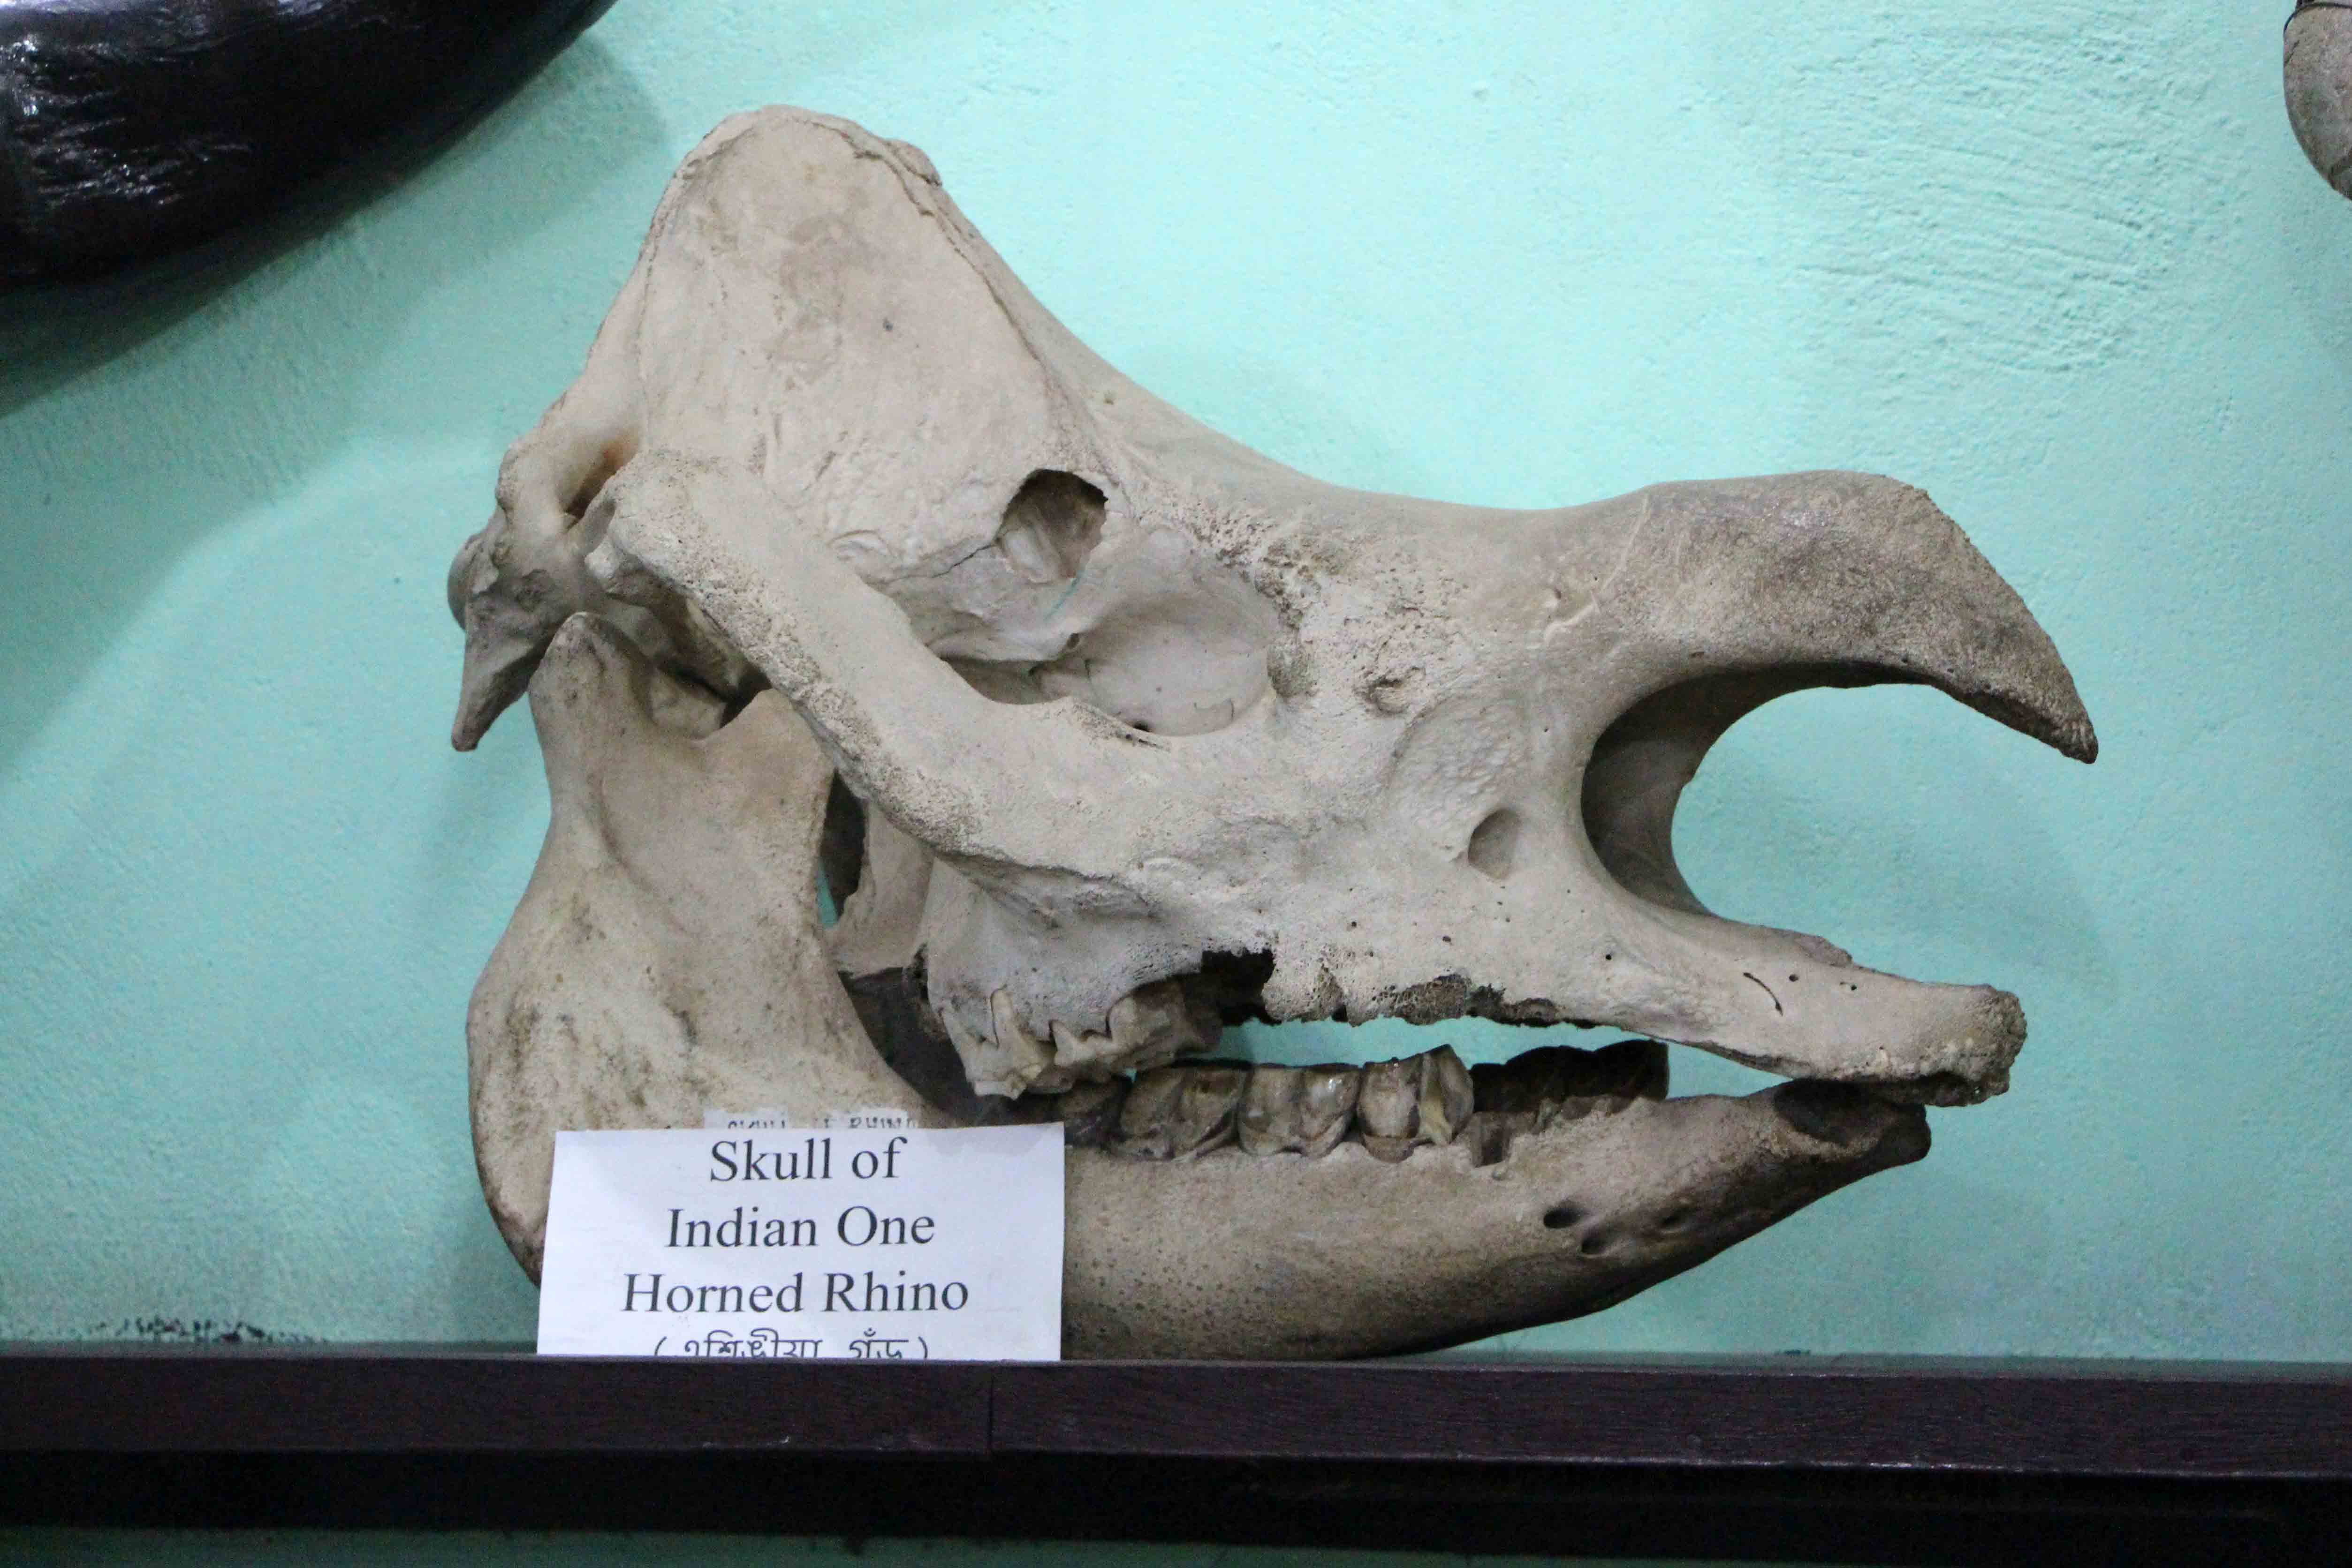 An image of the skull of an  Indian One Horned Rhinoceros